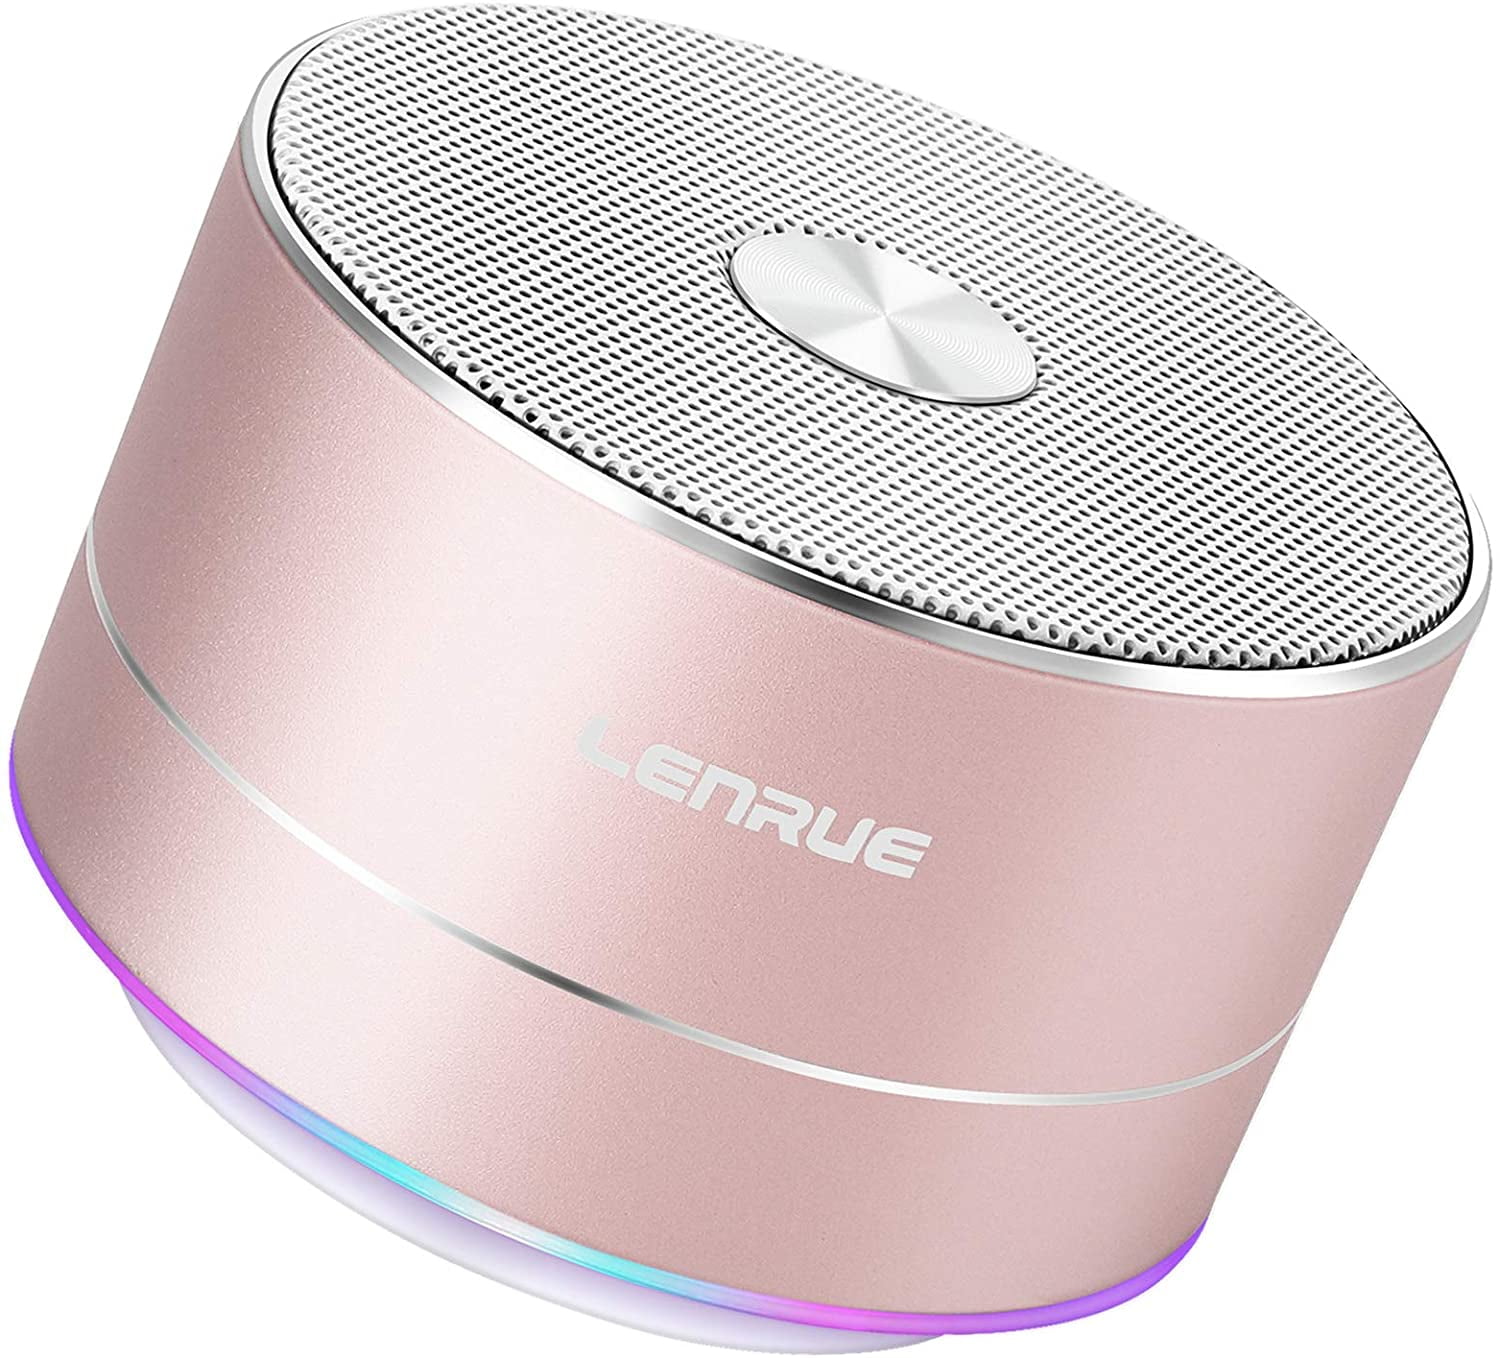 LENRUE Portable Wireless Bluetooth Speaker Built-in-Mic,Handsfree Card,HD Ipad Smartphone and iPhone Sound Bass Call,AUX with More for Android and Line,TF